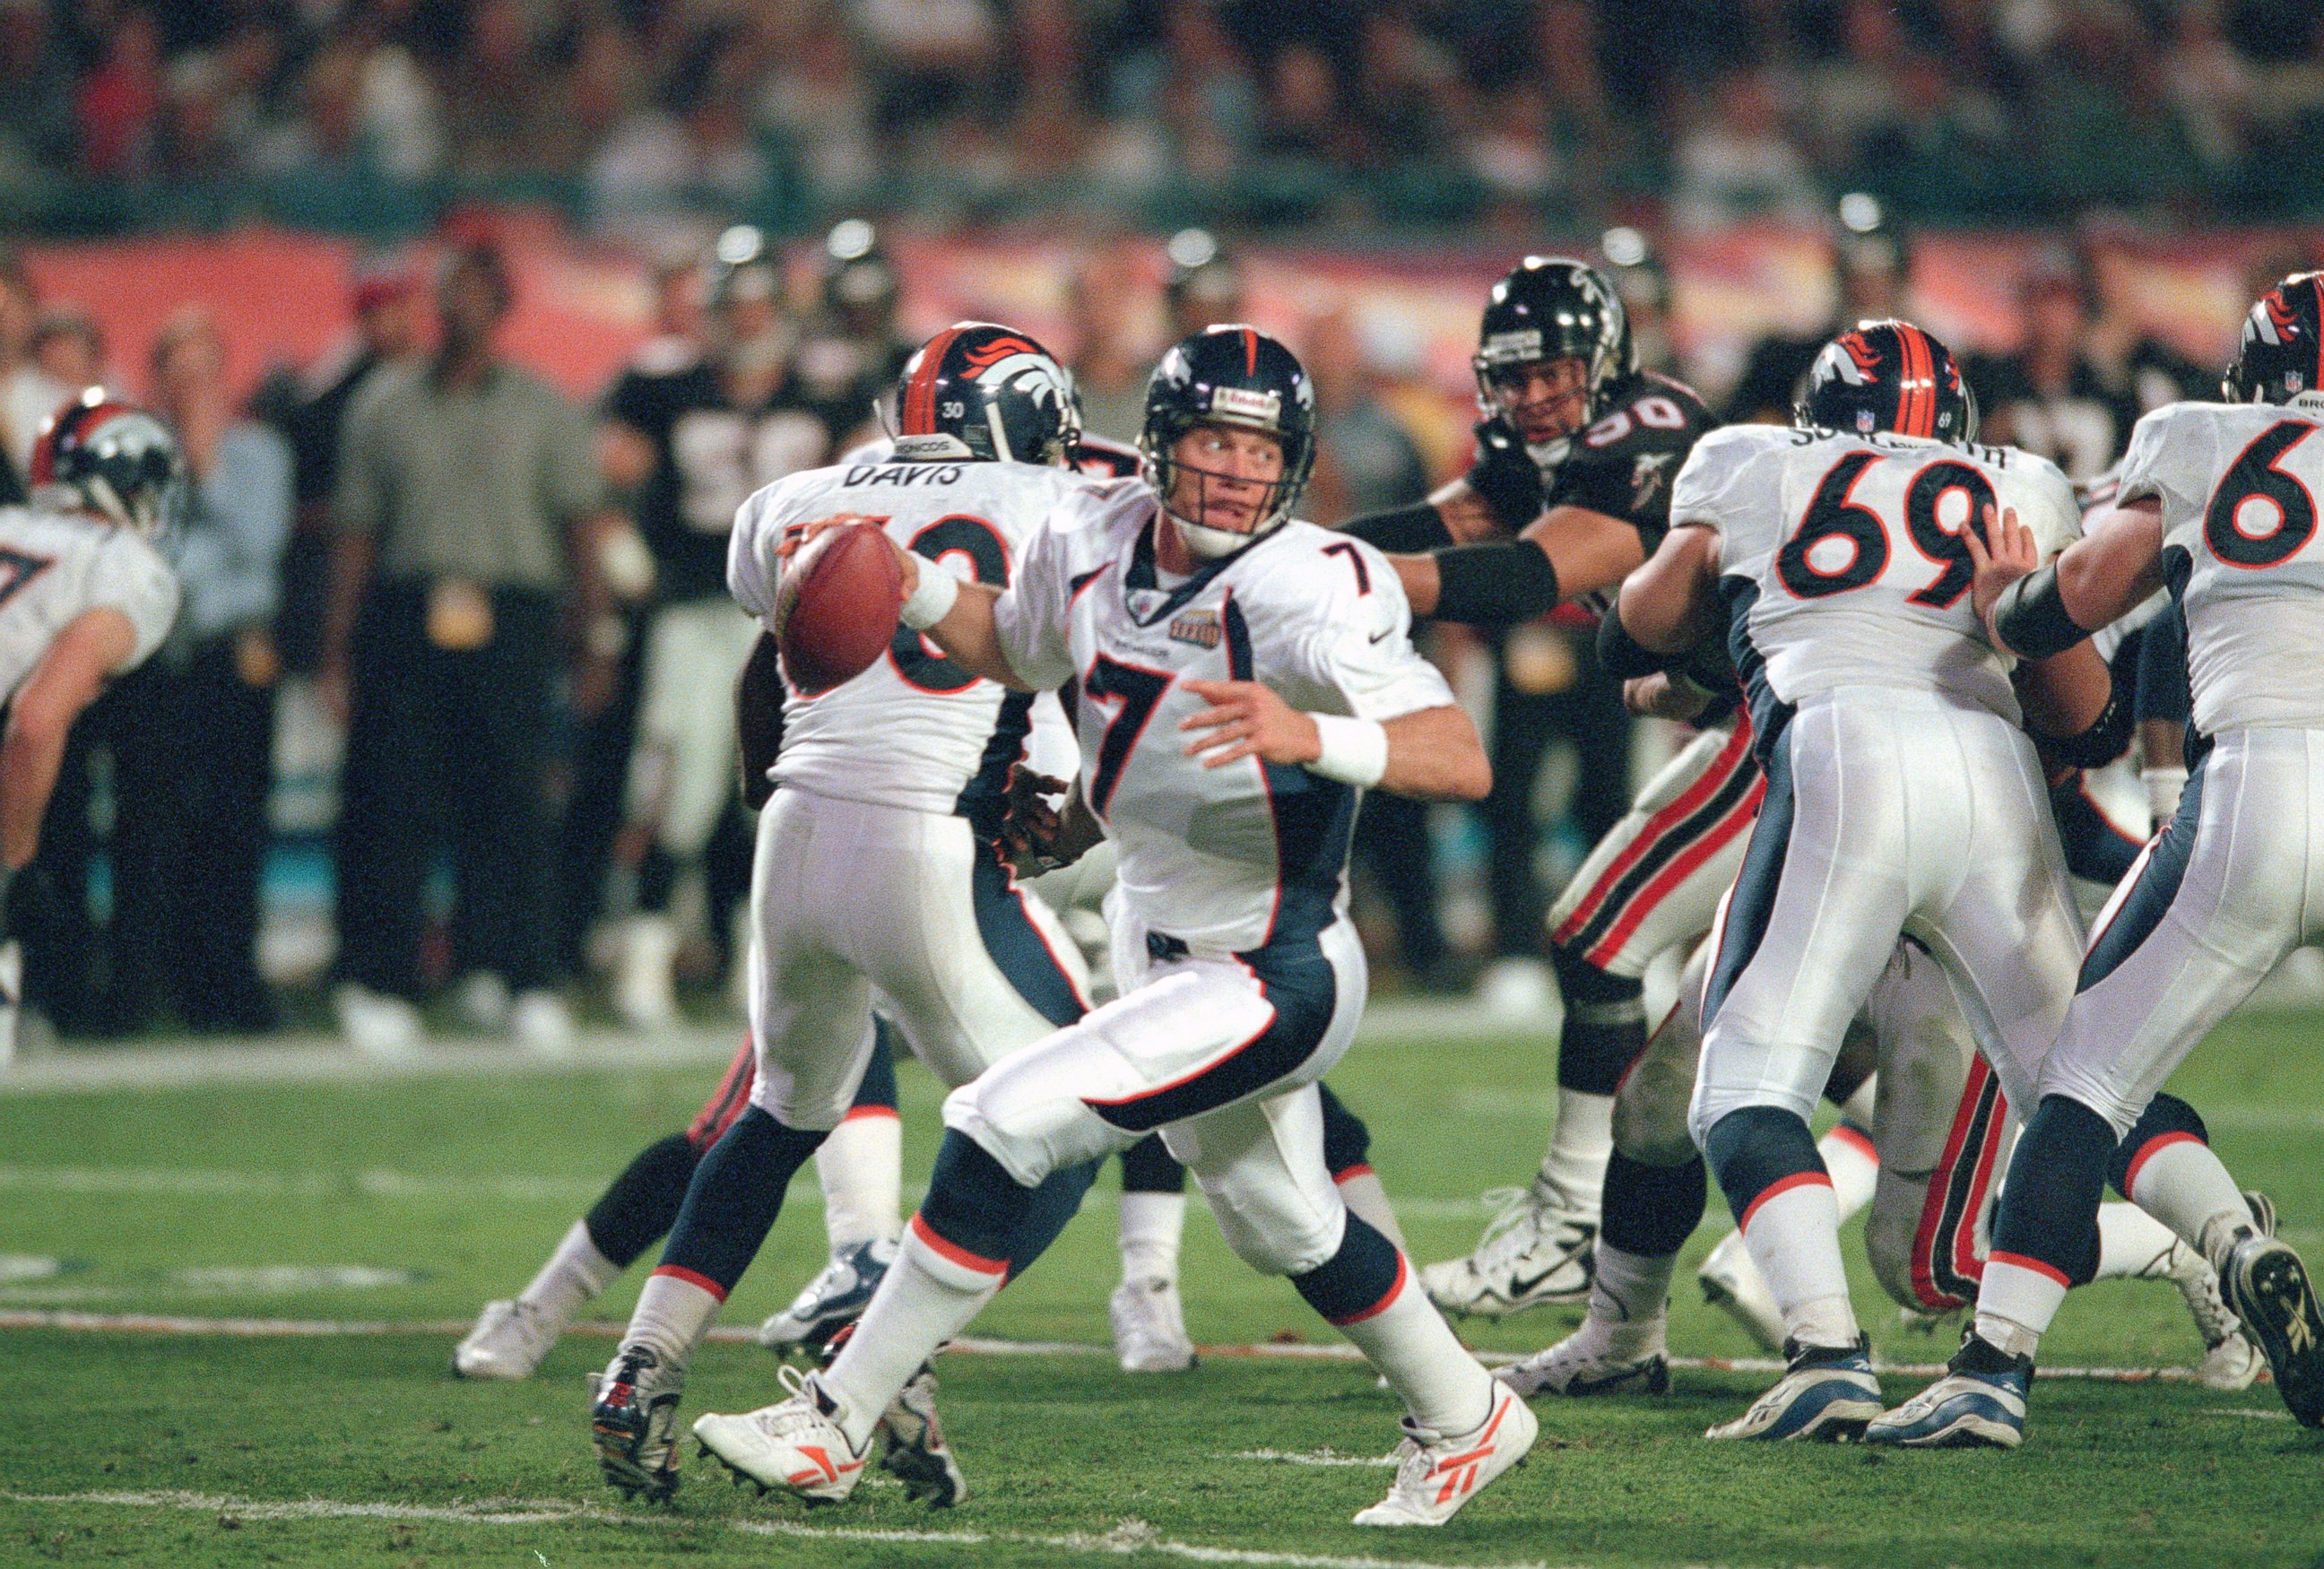 PHOTO: John Elway #7 of the Denver Broncos looks to pass against the Atlanta Falcons during Super Bowl XXXIII, Jan. 31, 1999, at Pro Player Stadium in Miami. The Broncos won the game 35-19. 